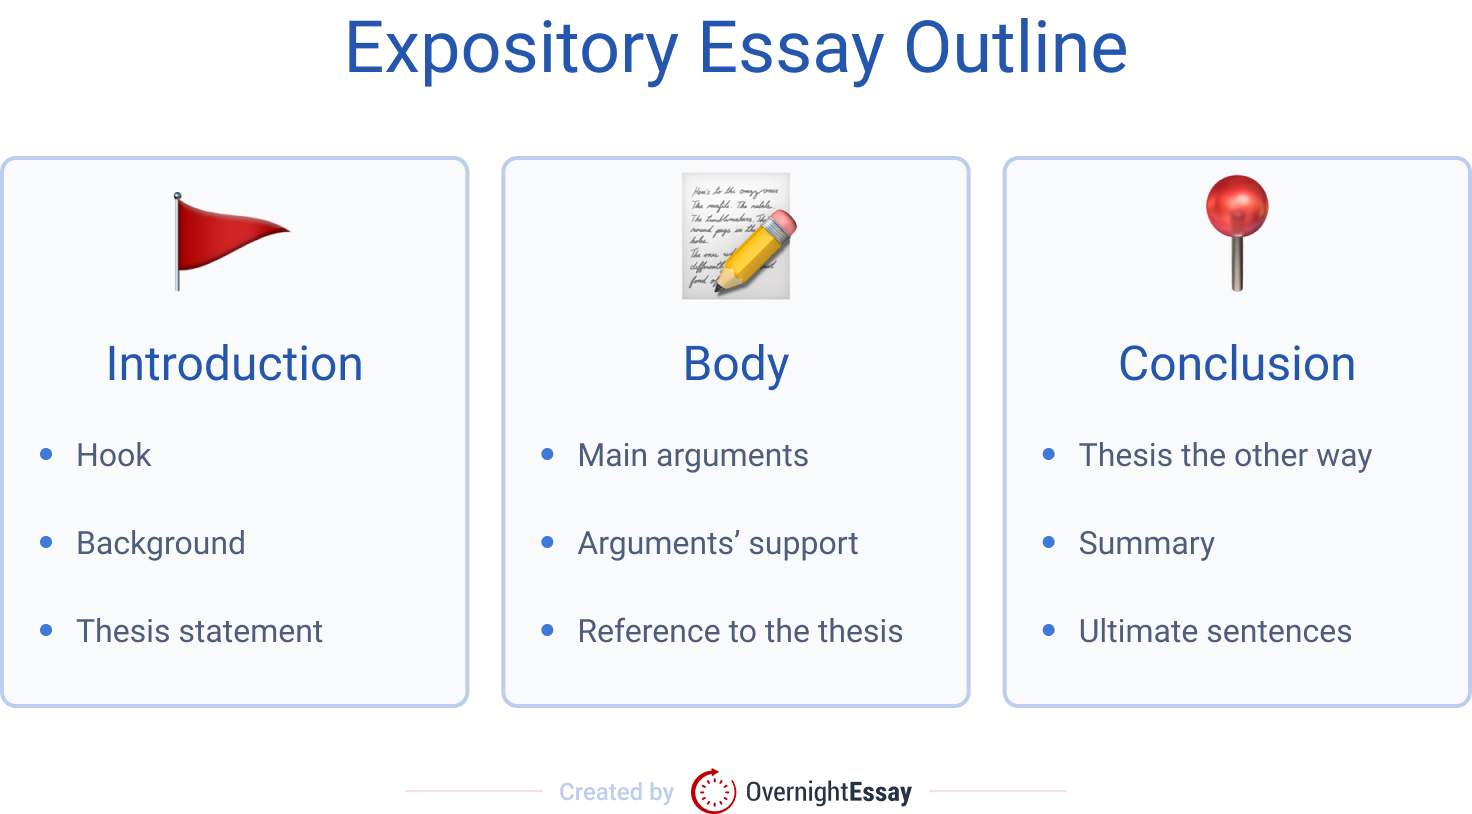 The picture contains the detailed outline of an expository essay.